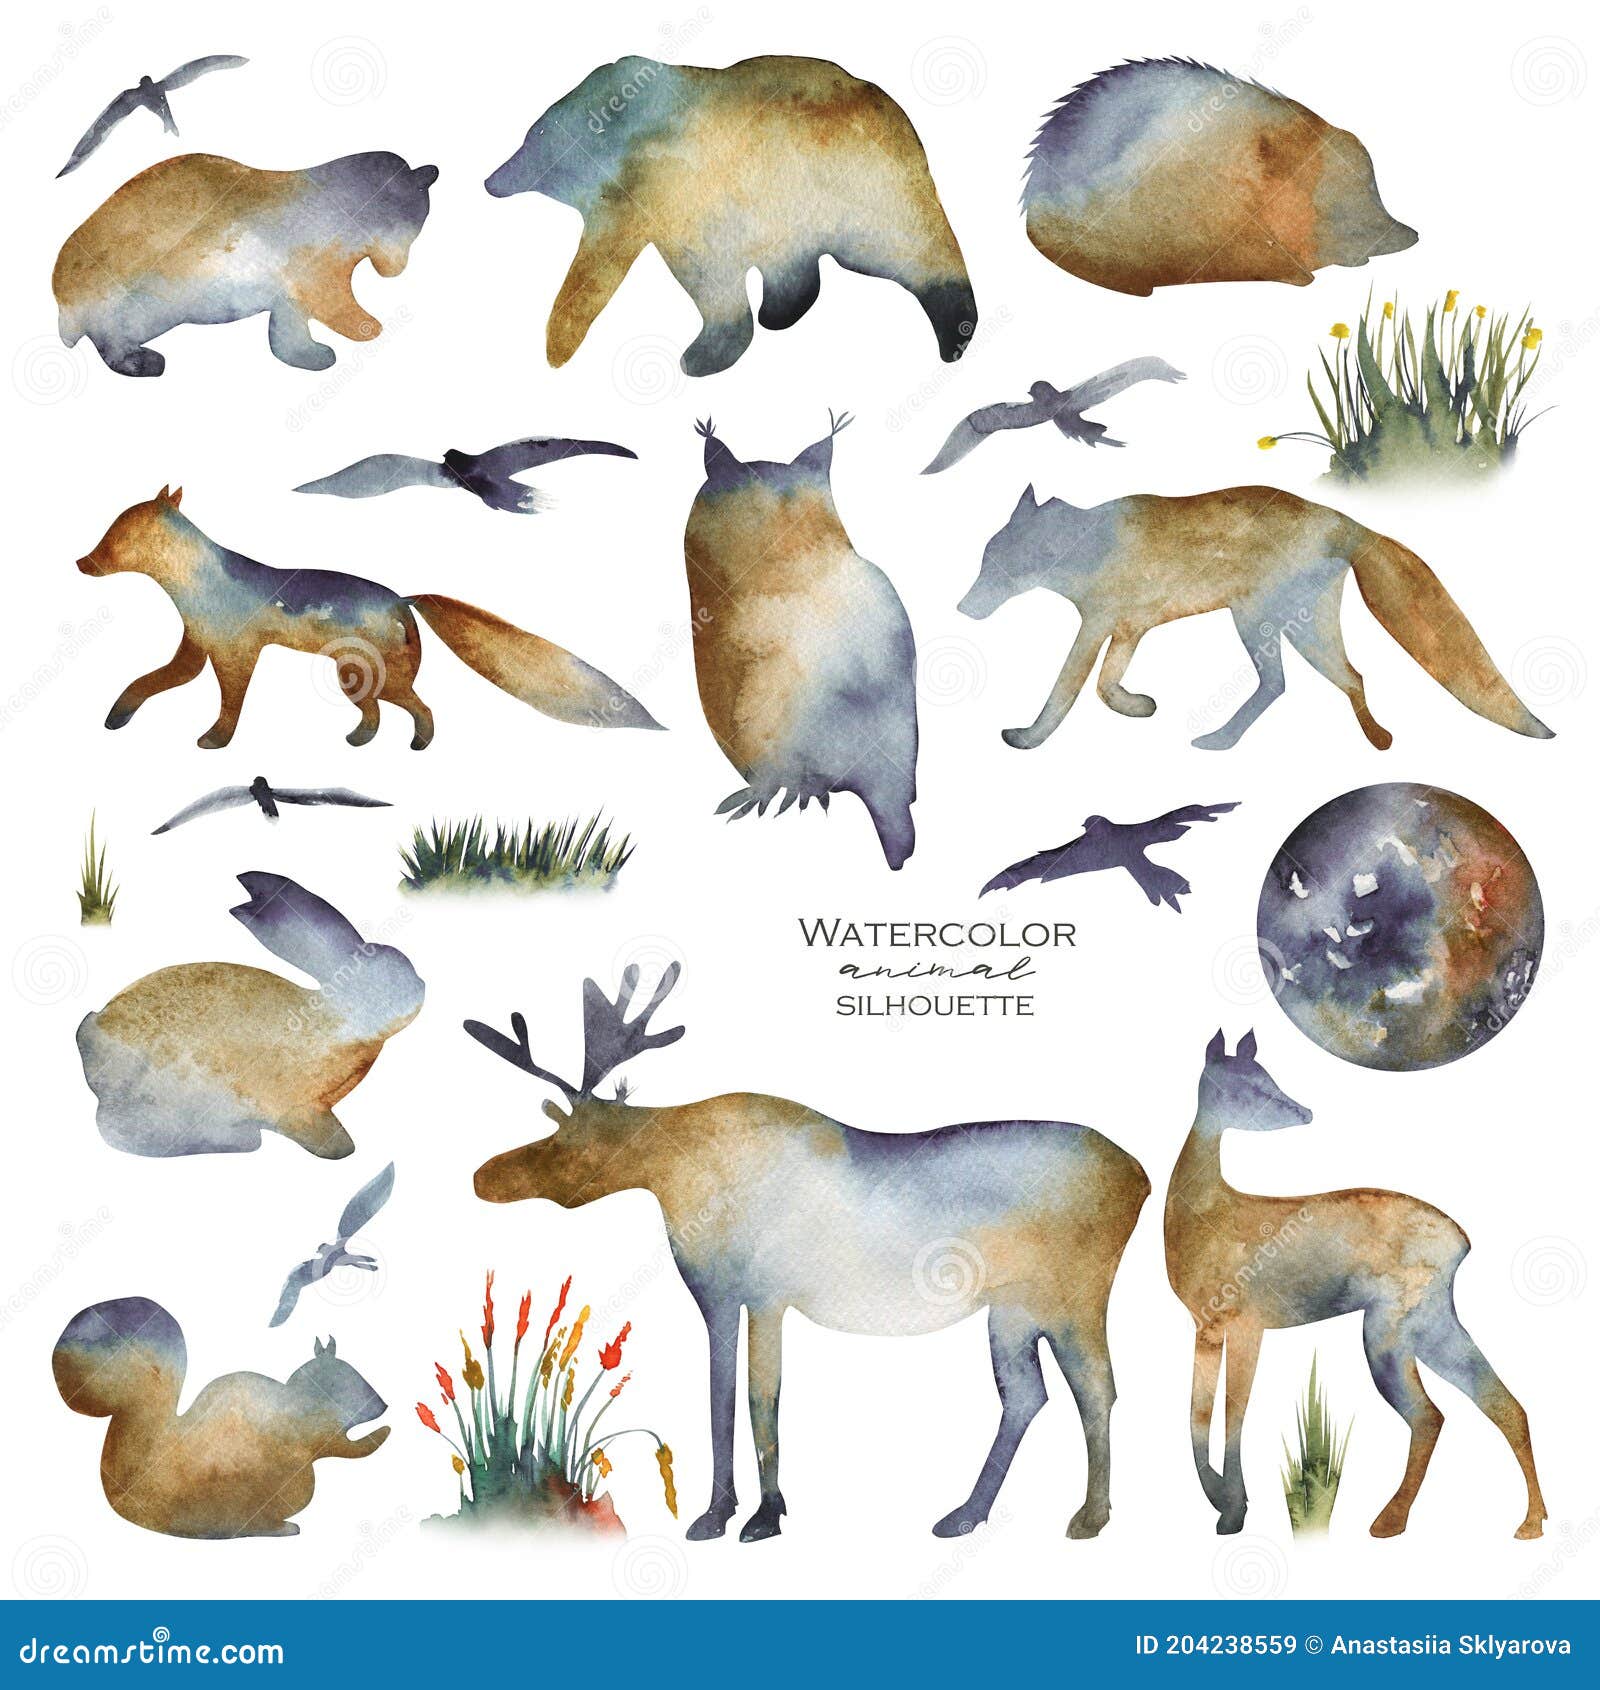 Collection of Watercolor Silhouettes of Forest Animals Bear, Owl, Fox,  Wolf, Deer, Hare, Birds, Hedgehog, Squirrel, Elk Stock Image - Image of  abstract, element: 204238559